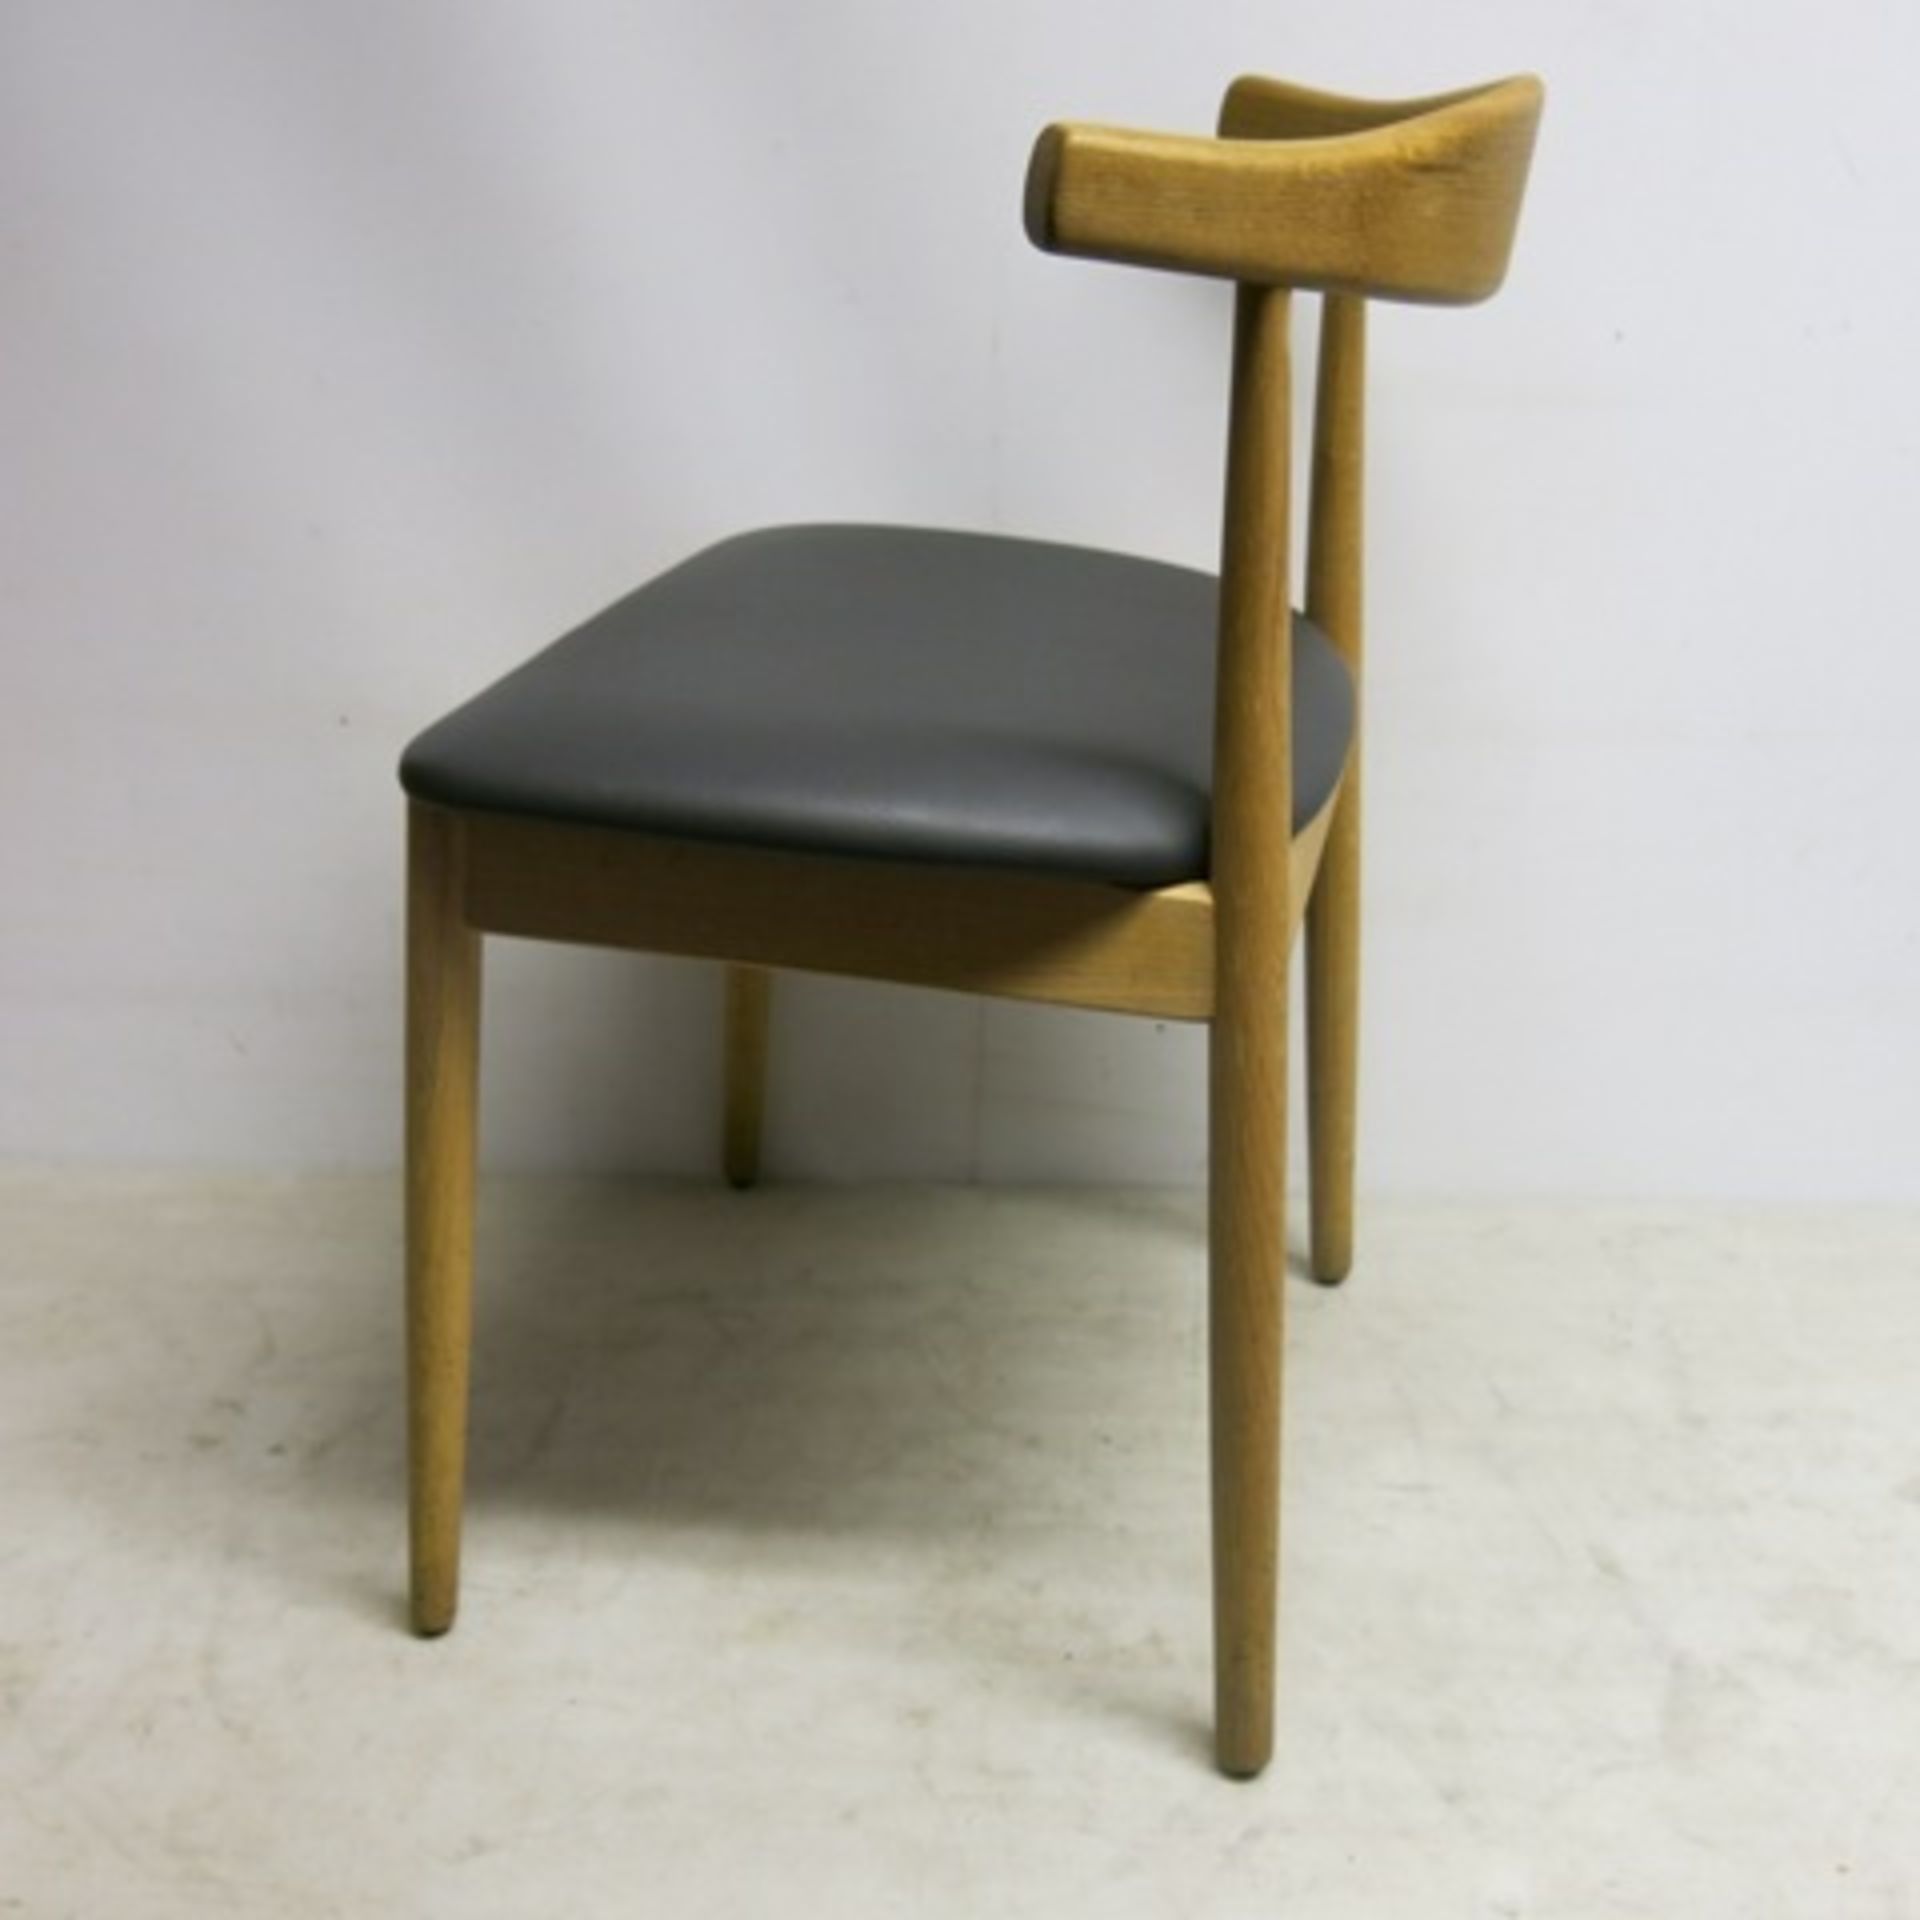 4 x Designer Style, Solid Light Oak Dining Chairs with Grey Faux Leather Padded Seat. - Image 4 of 7